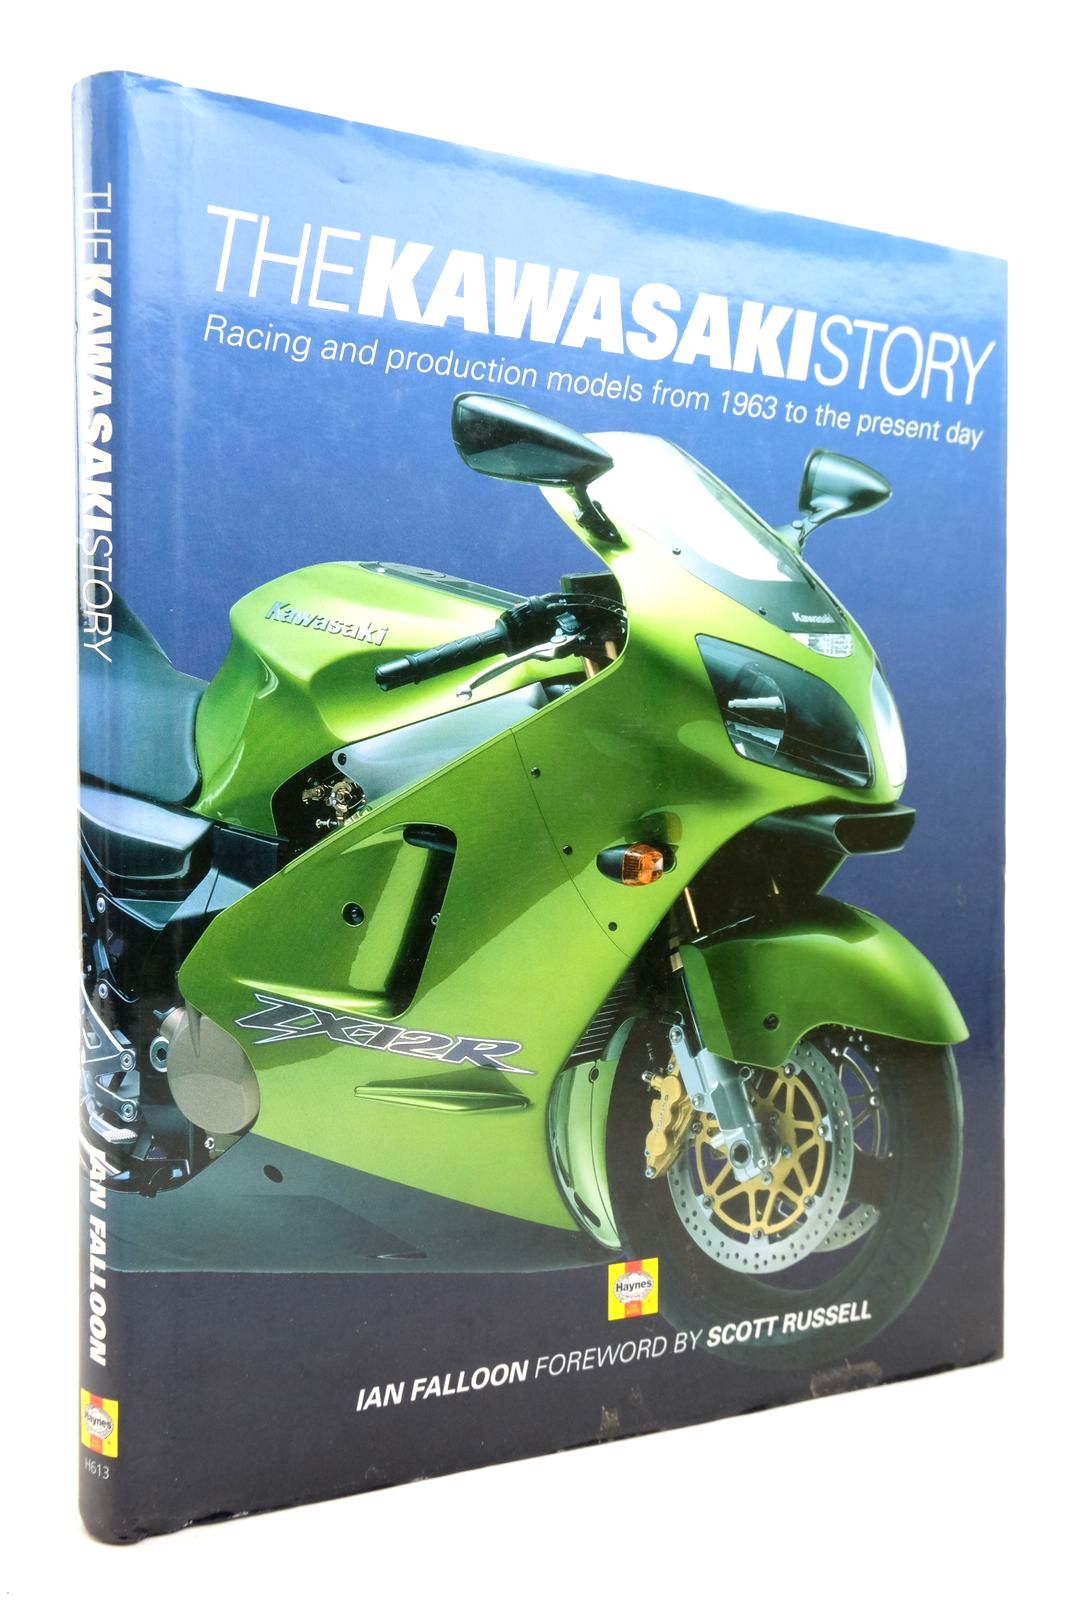 Photo of THE KAWASAKI STORY written by Falloon, Ian
Russell, Scott published by Haynes Publishing (STOCK CODE: 2140753)  for sale by Stella & Rose's Books